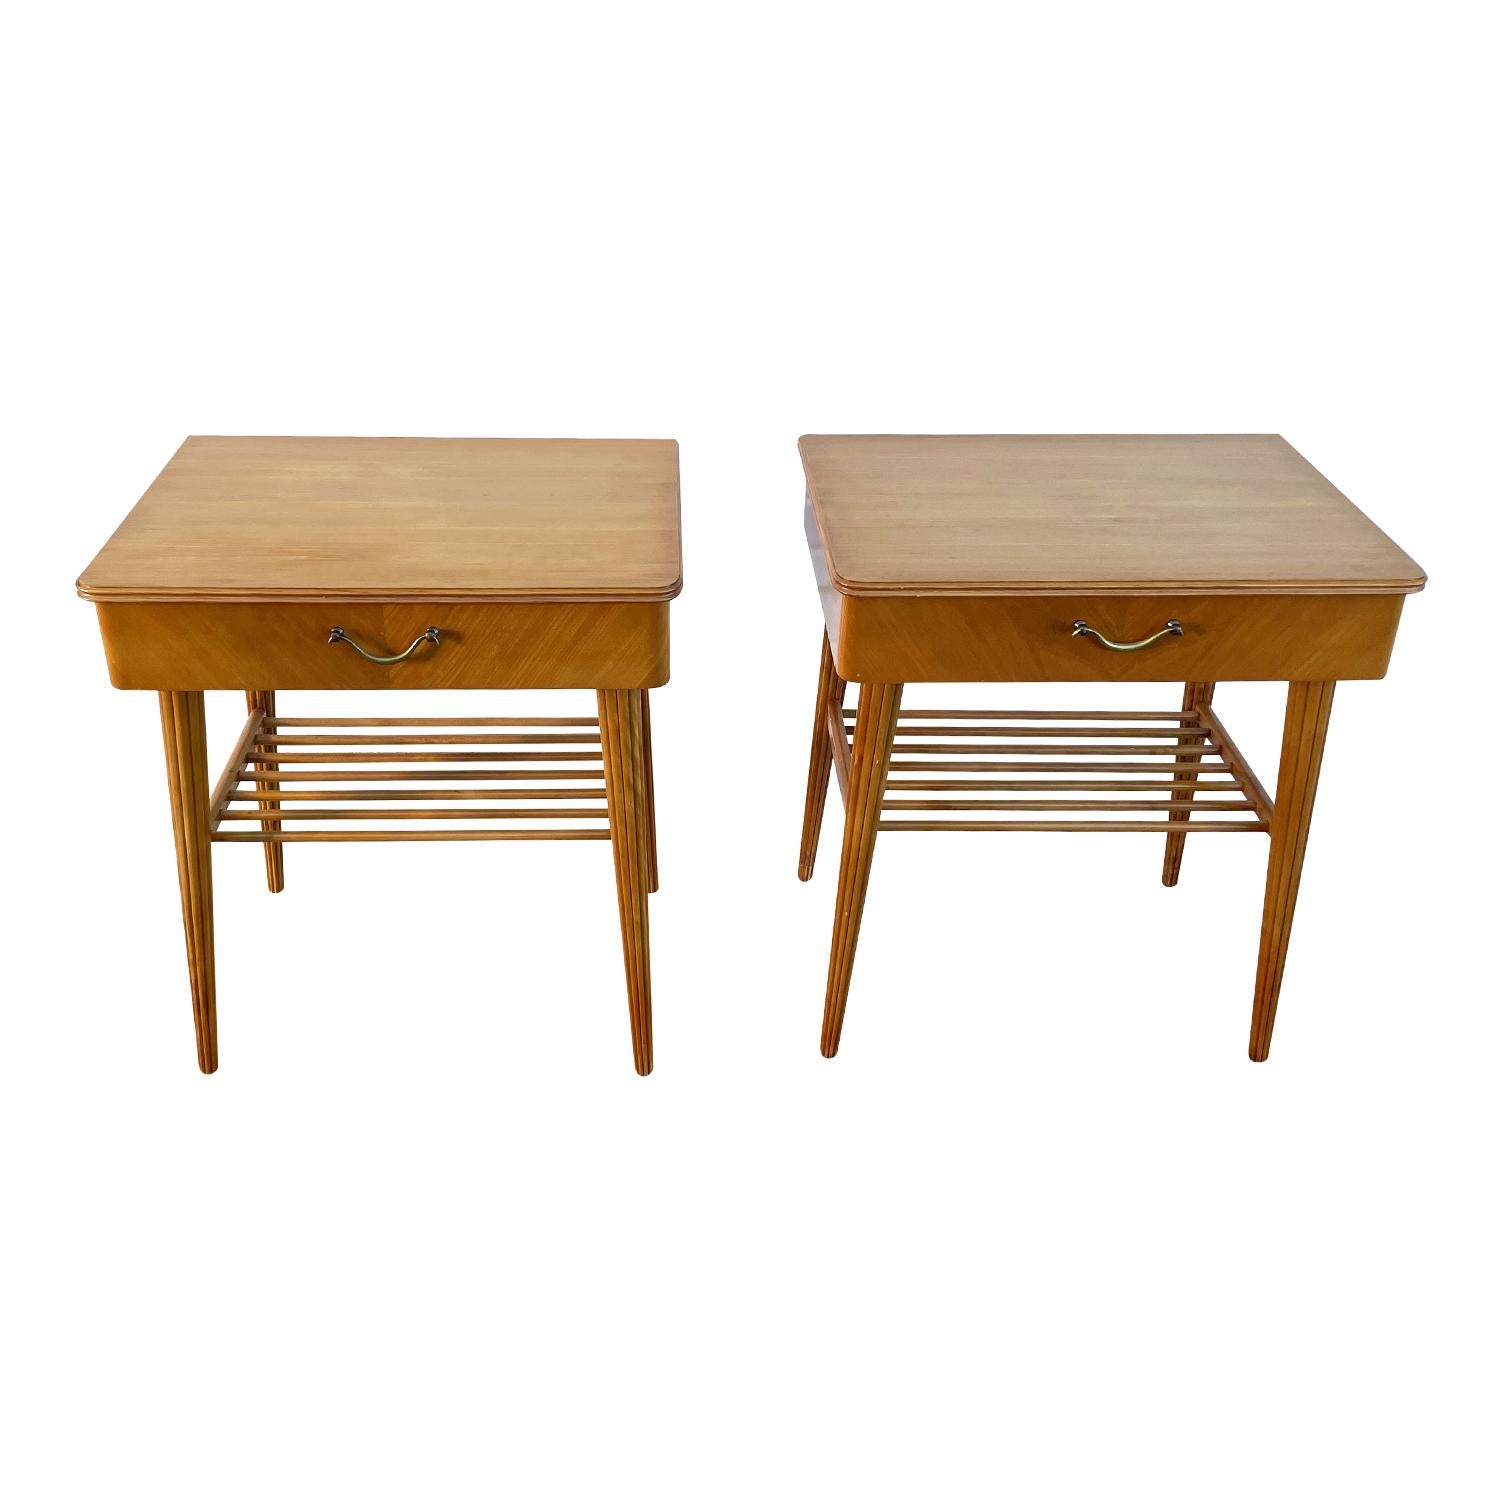 Polished 20th Century Danish Pair of Birchwood Nightstands - Vintage Brass Bedside Tables For Sale